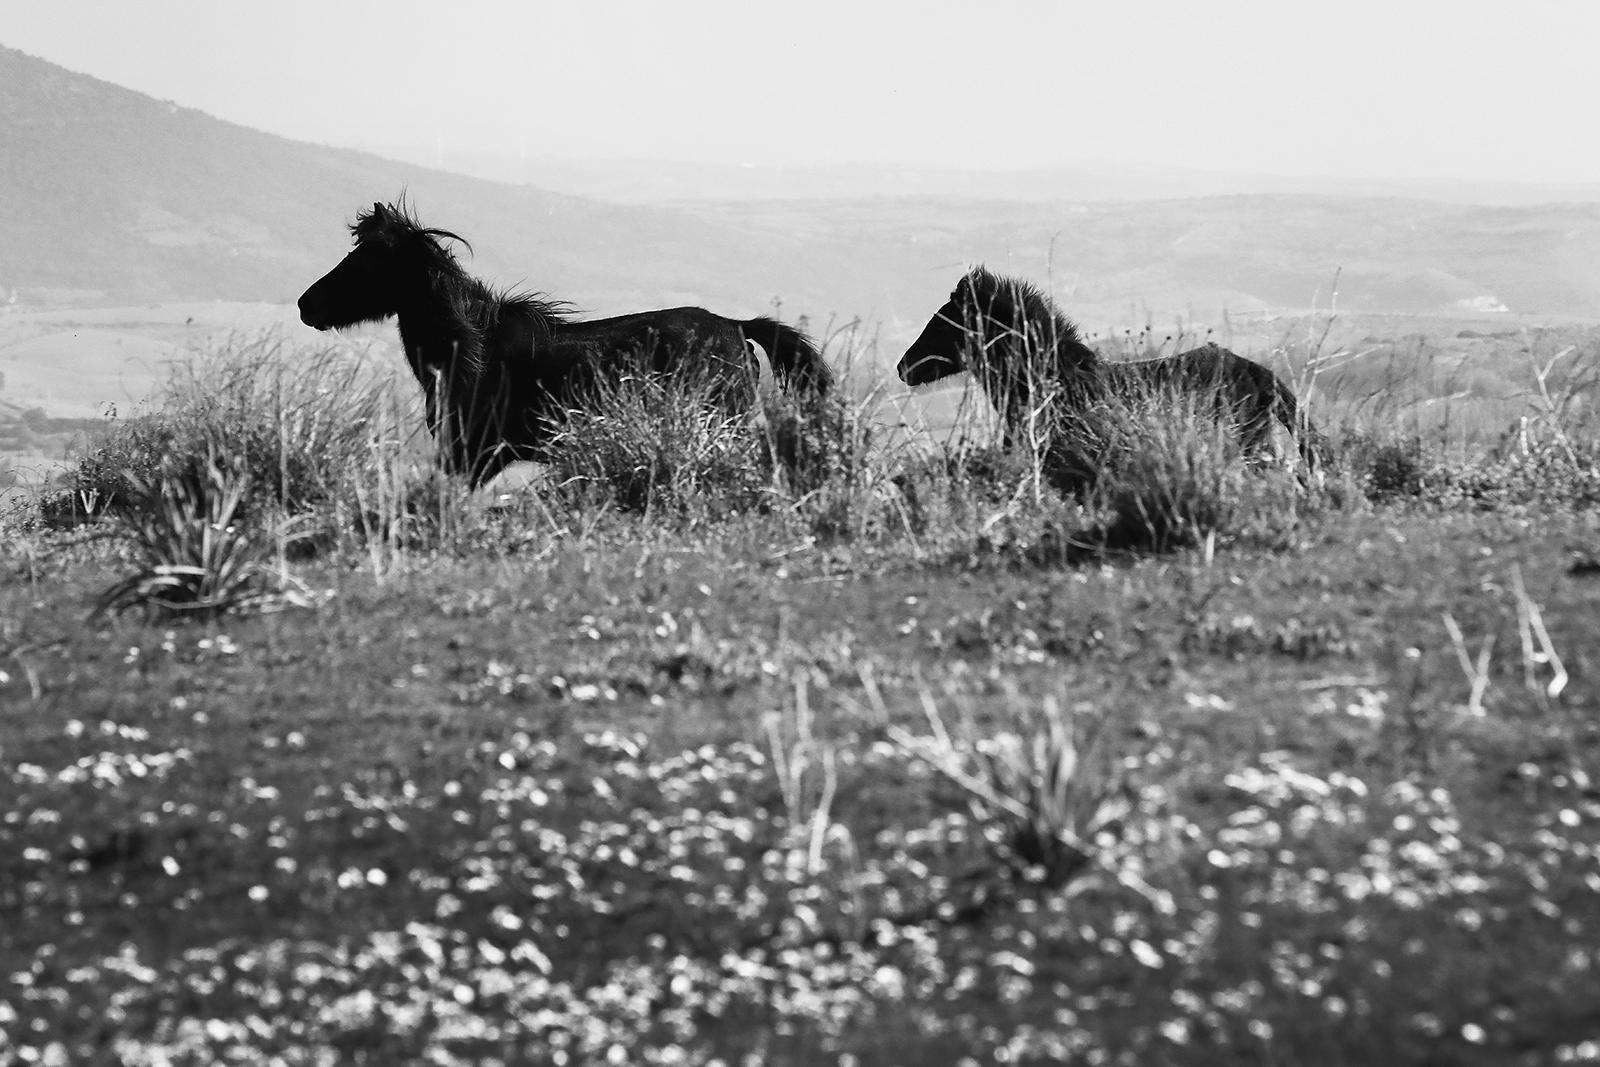 Laurent Campus Still-Life Photograph - Cavallini 02 - Signed limited animal edition print, Black and white, wild horse